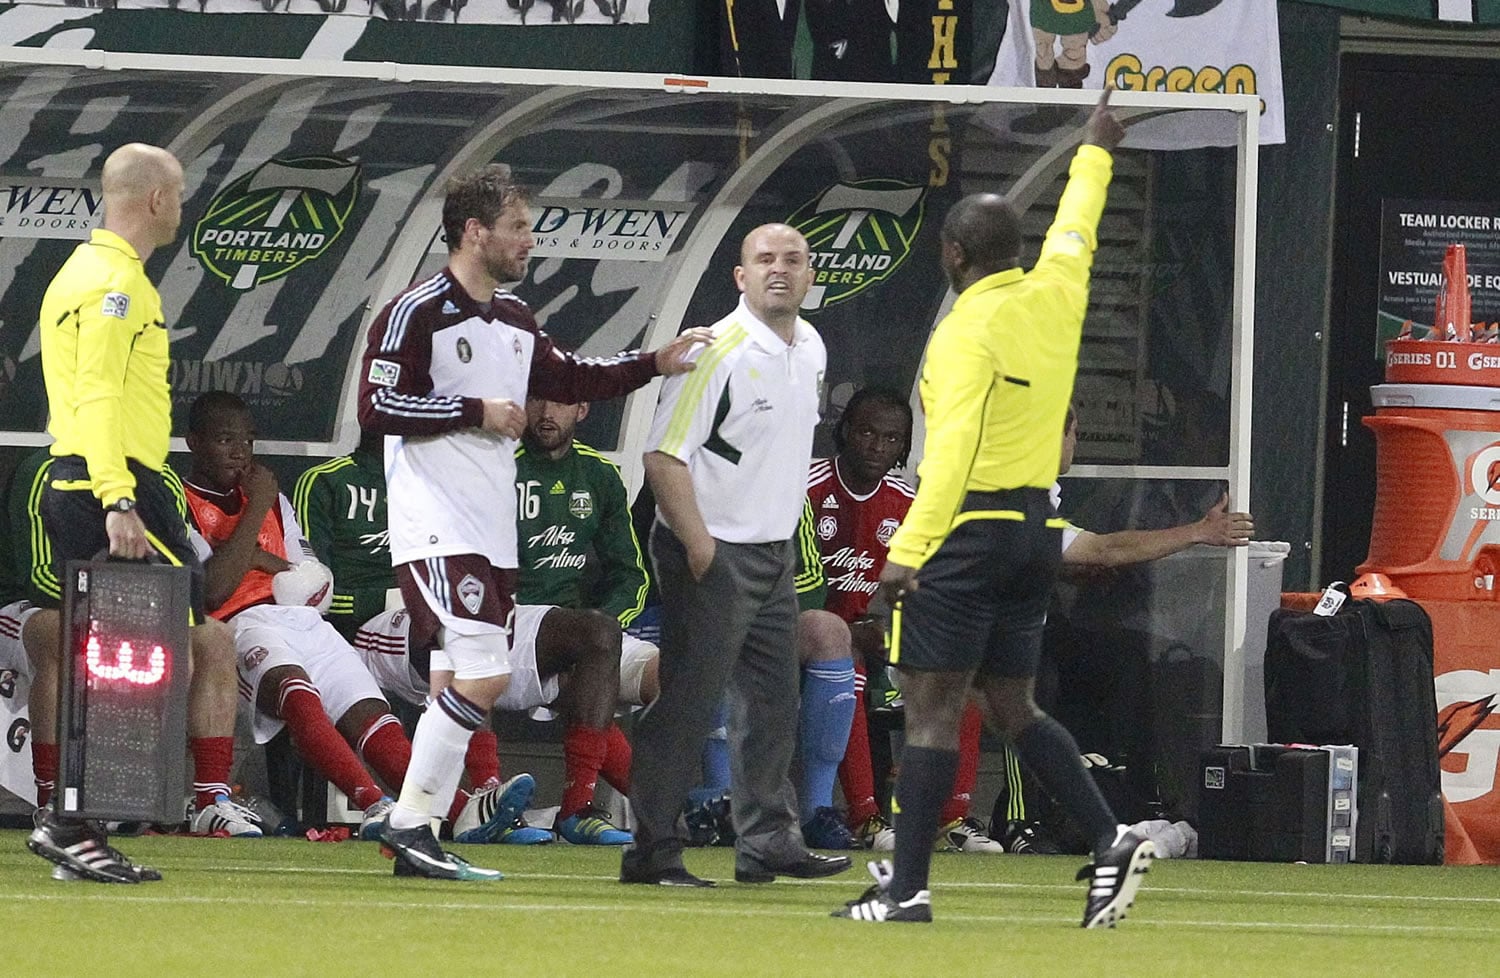 Portland Timbers coach John Spencer paid the price for this ejection last Saturday against the Colorado Rapids.